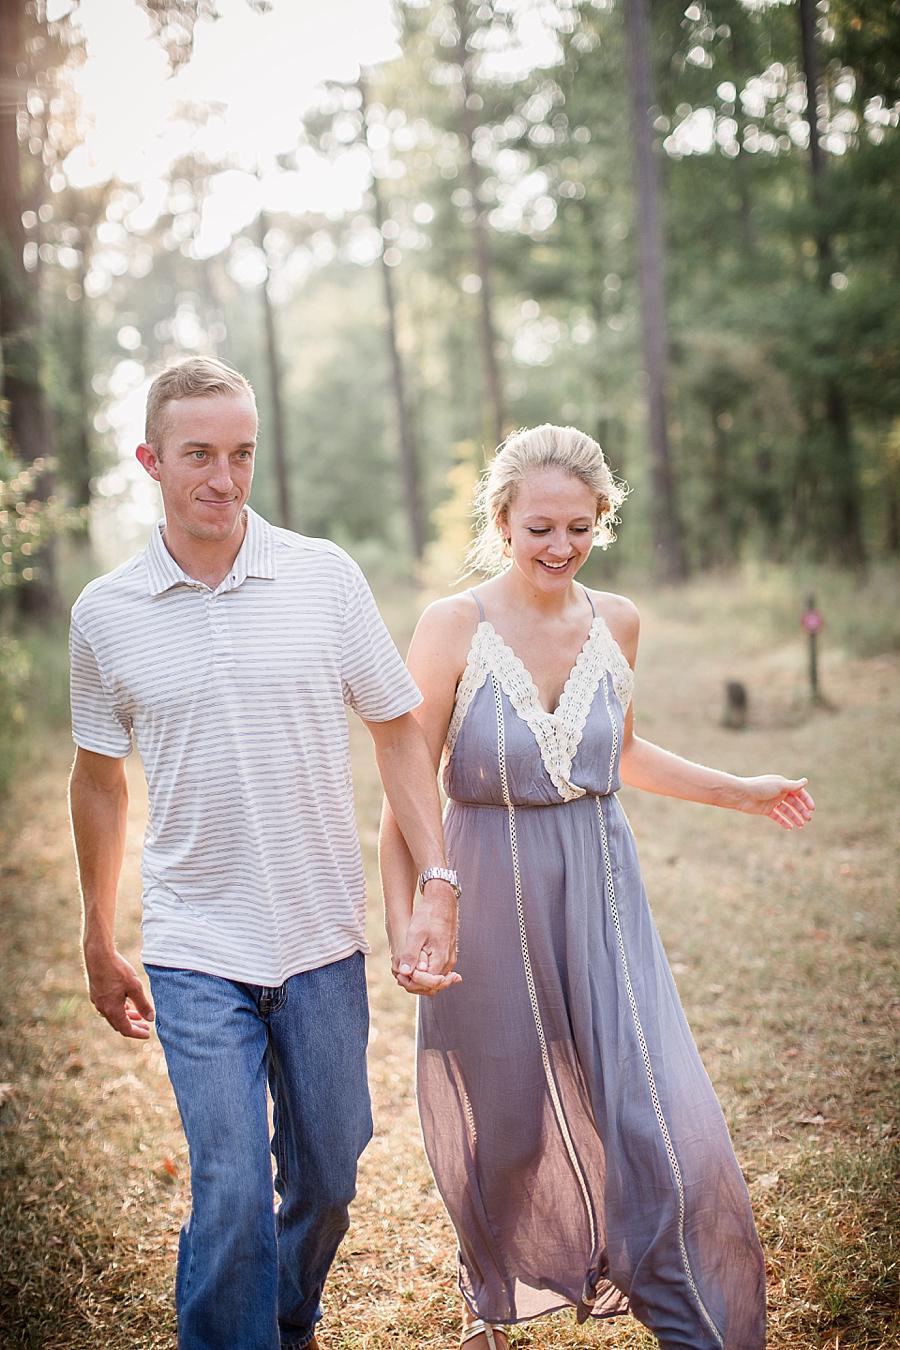 Walking together at this Air Force Engagement Session by Knoxville Wedding Photographer, Amanda May Photos.